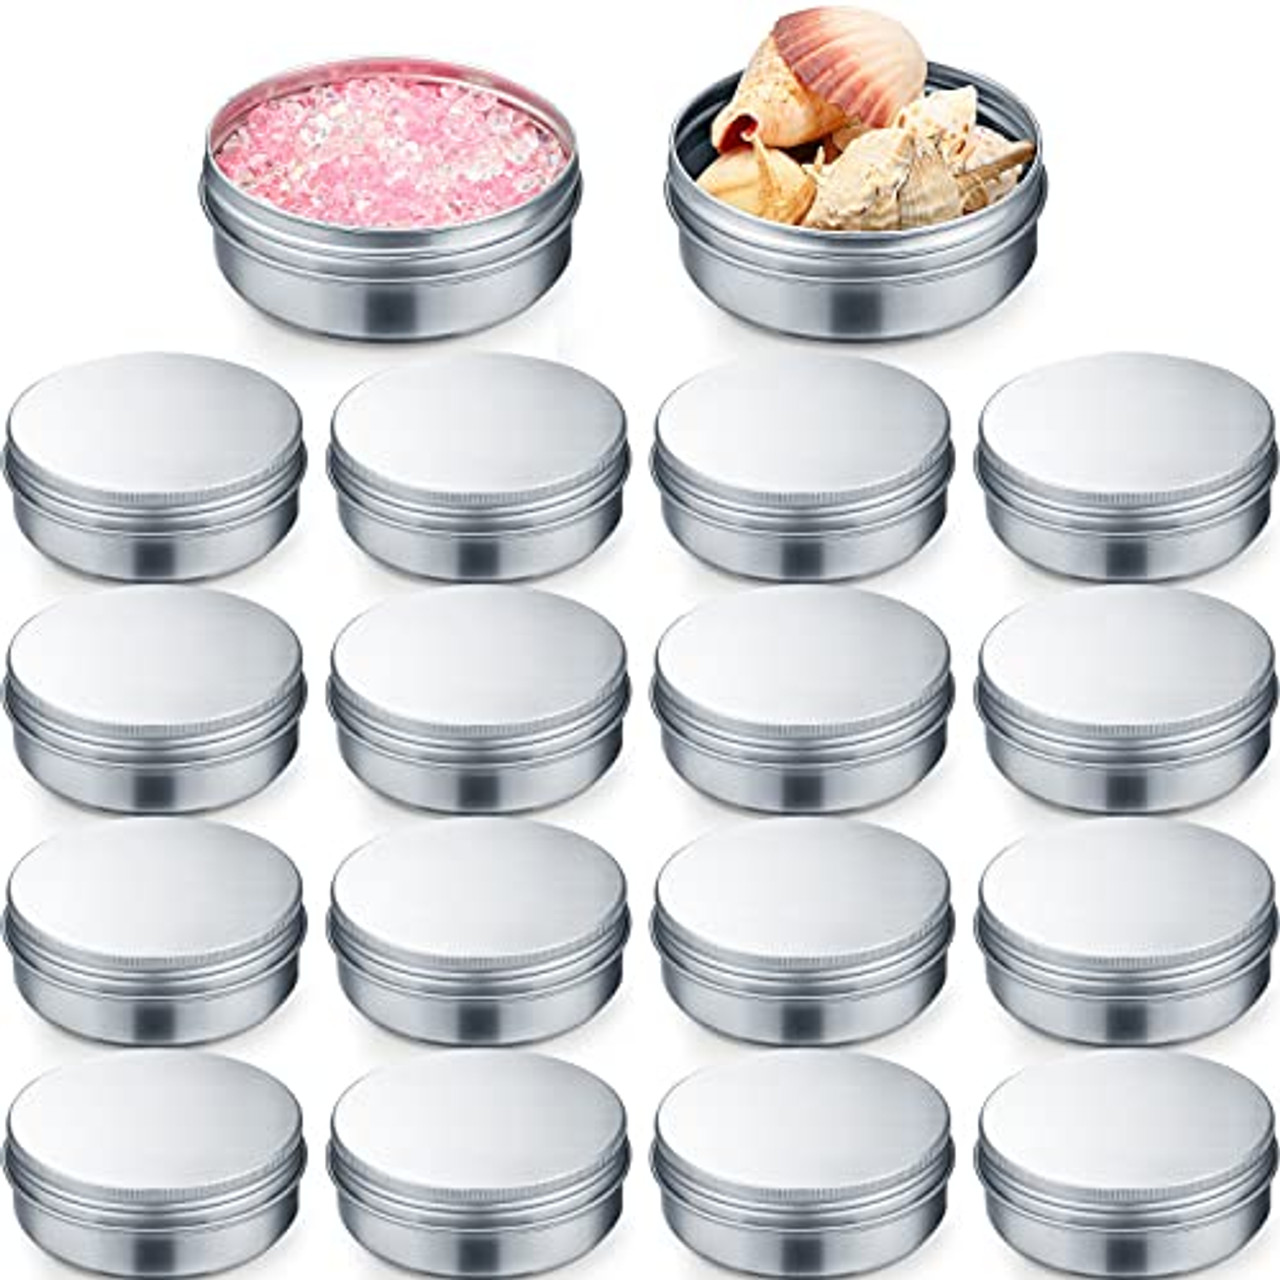 Acrux7 50 Pack 1oz Aluminum Tins with Lids, 30 ml Refillable Tin Containers  Screw Top, Round Lip Balm Tins, Small Metal Storage Travel Tin Cans for